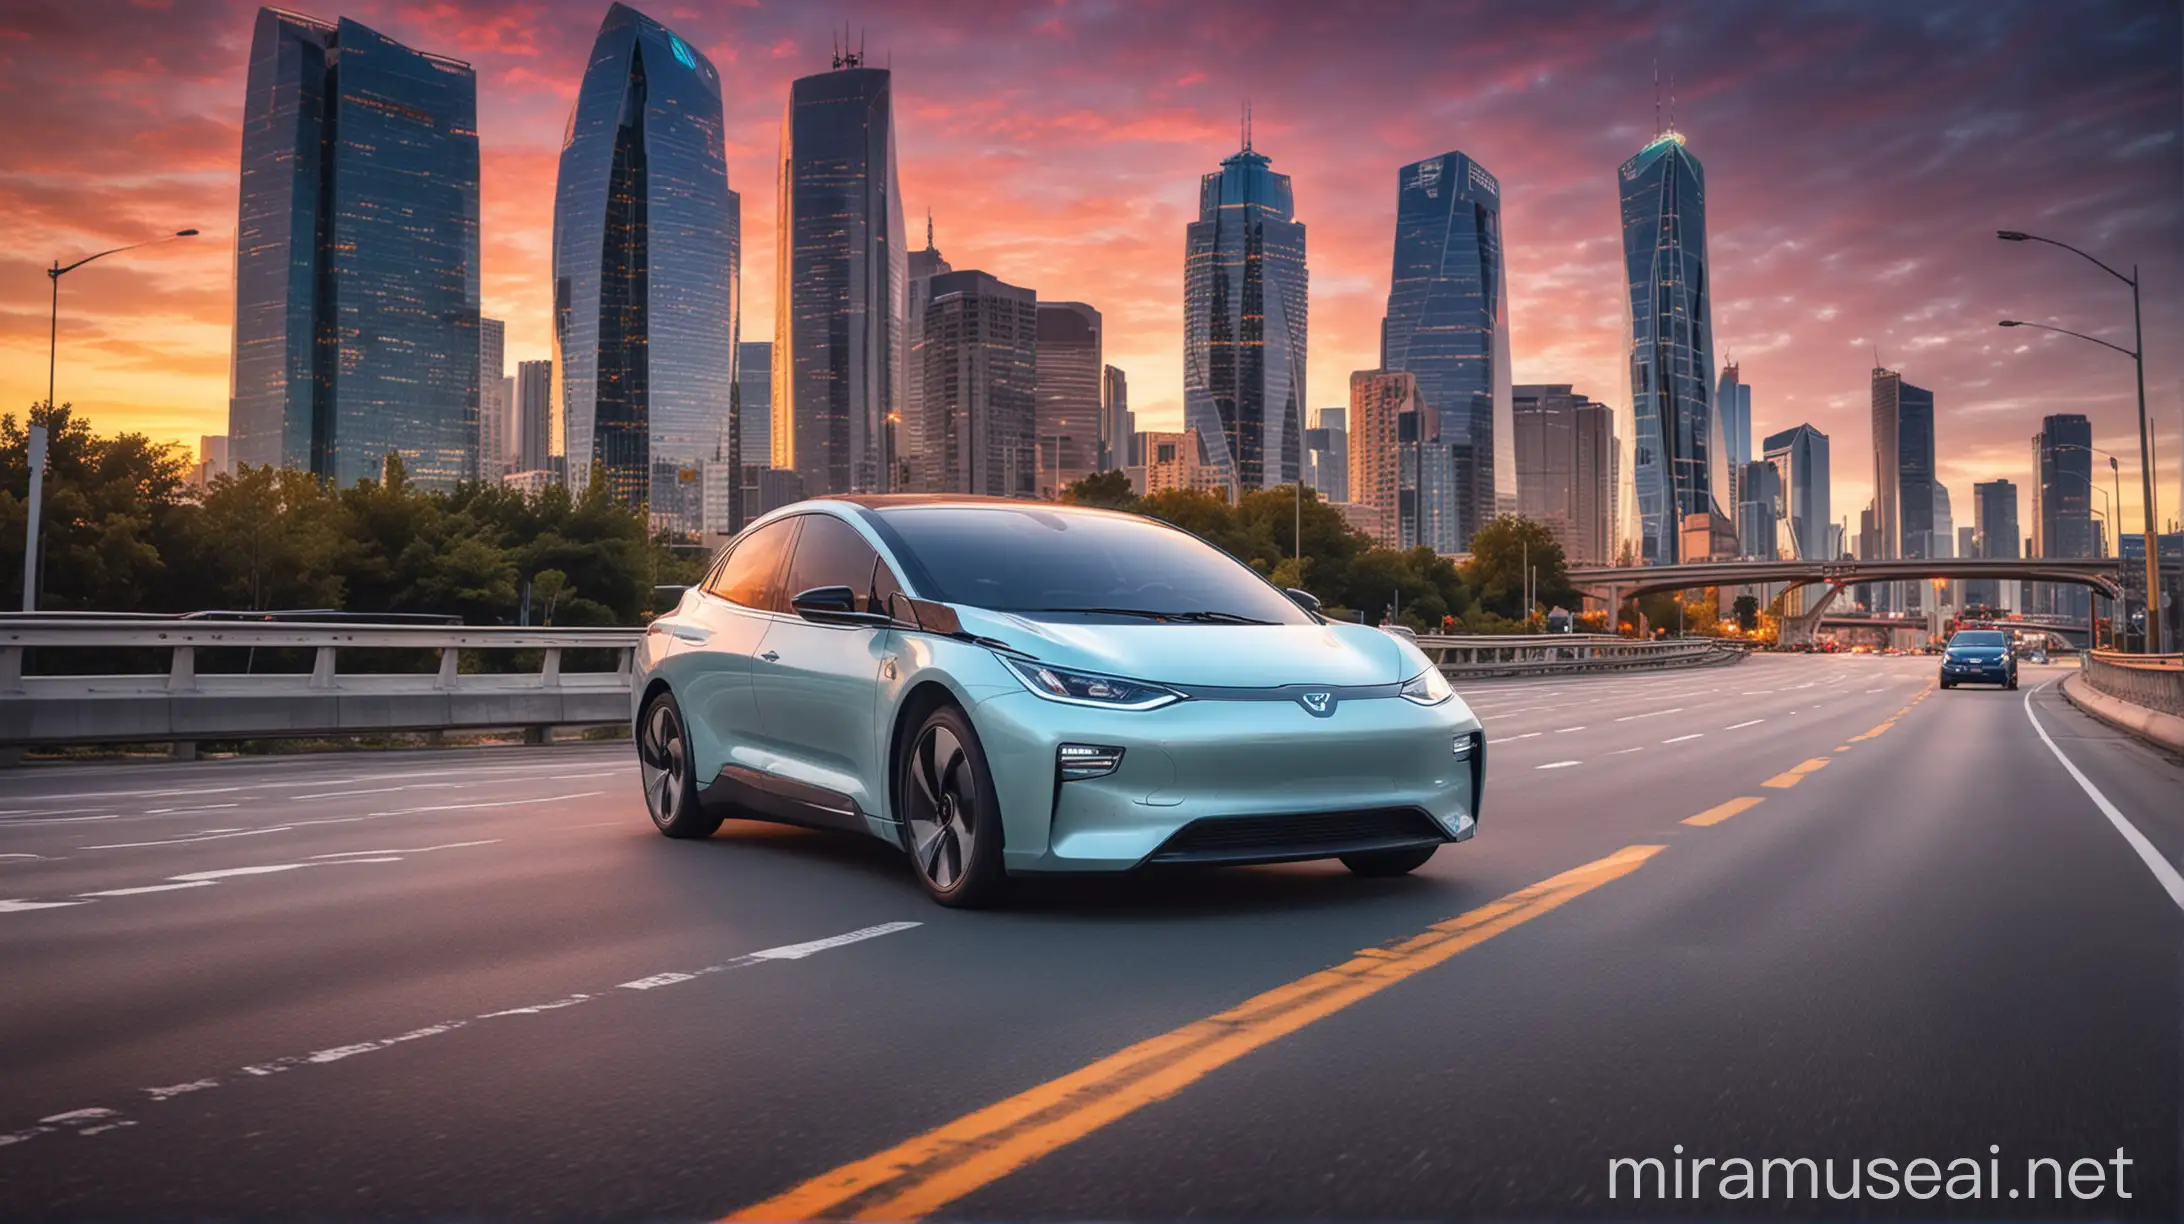 Futuristic photo of EV car on the highway go to downtown, high rise building in the background, vibrant color and light